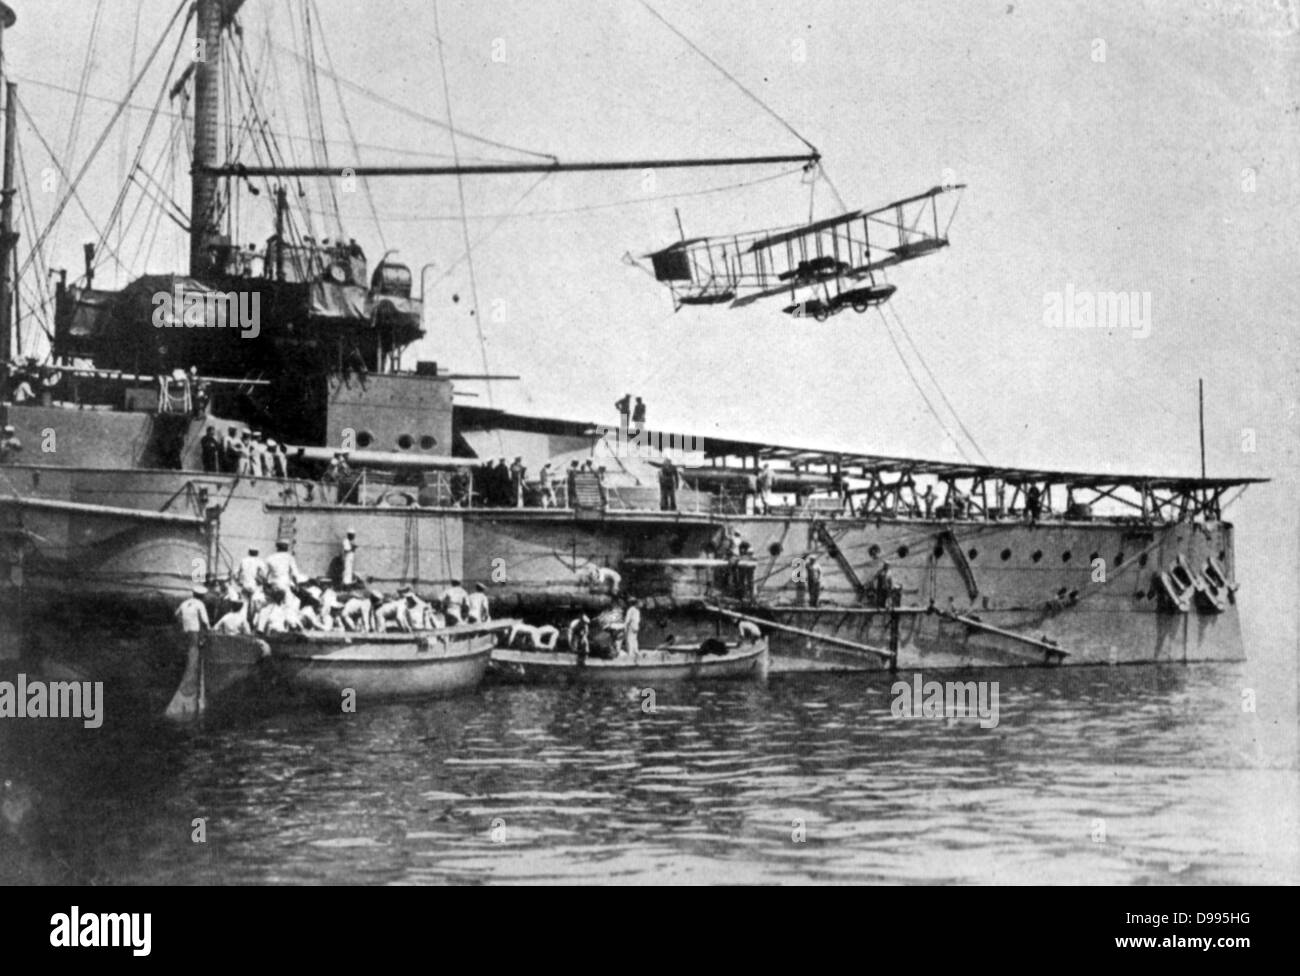 British Royal Navy warship with launching platform for the biplane which is suspended above it, c1914. Stock Photo